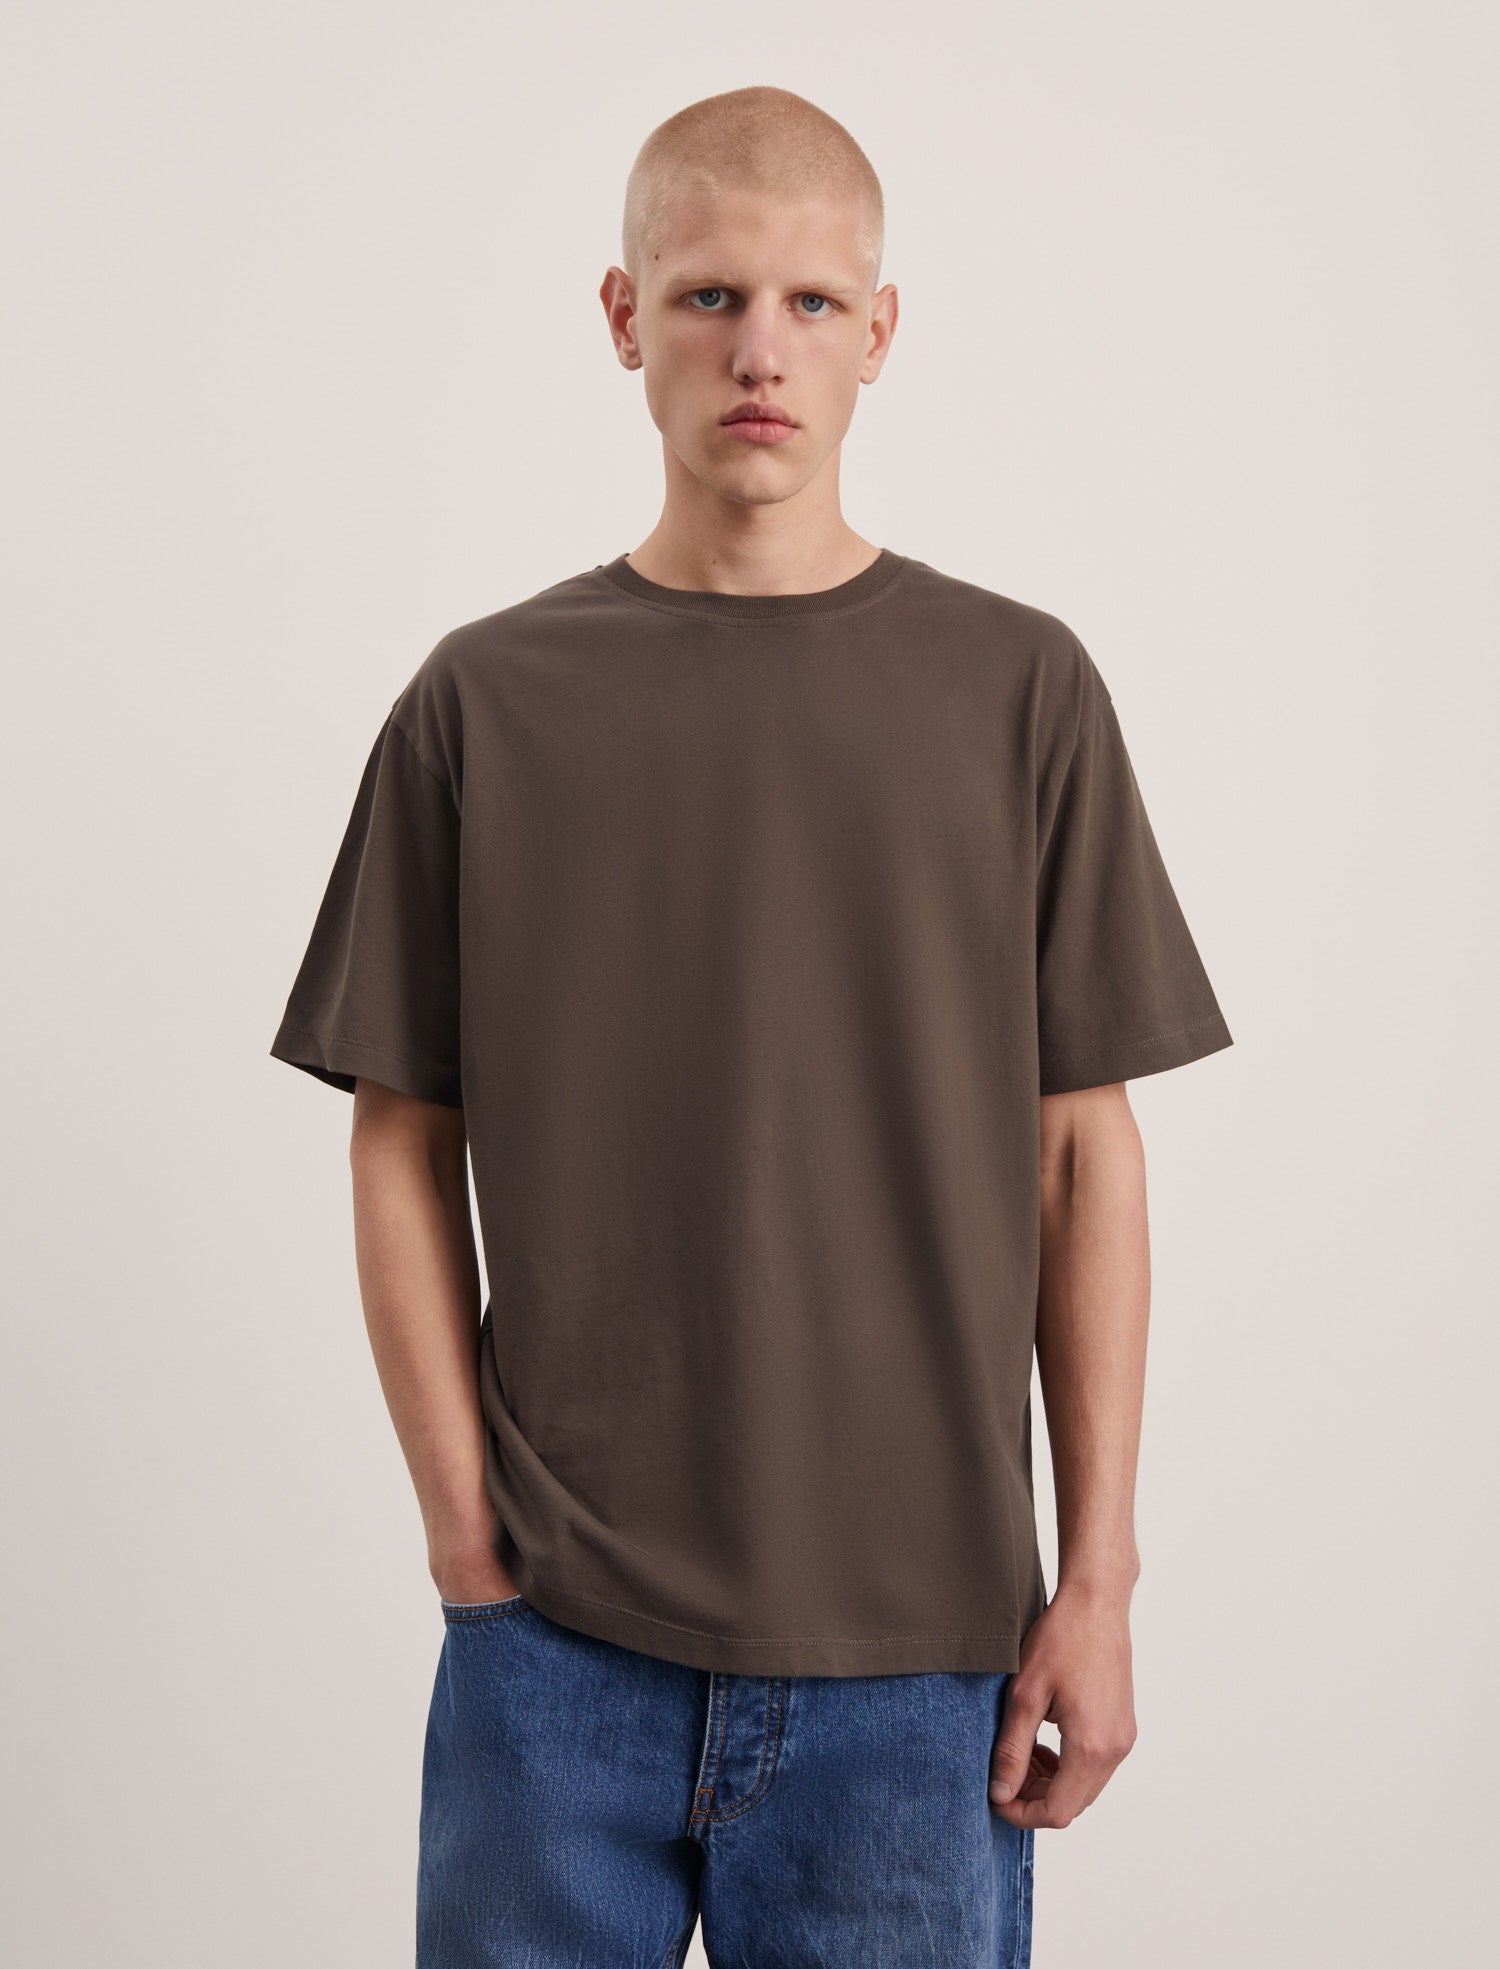 ANOTHER T-Shirt 1.0, Brown